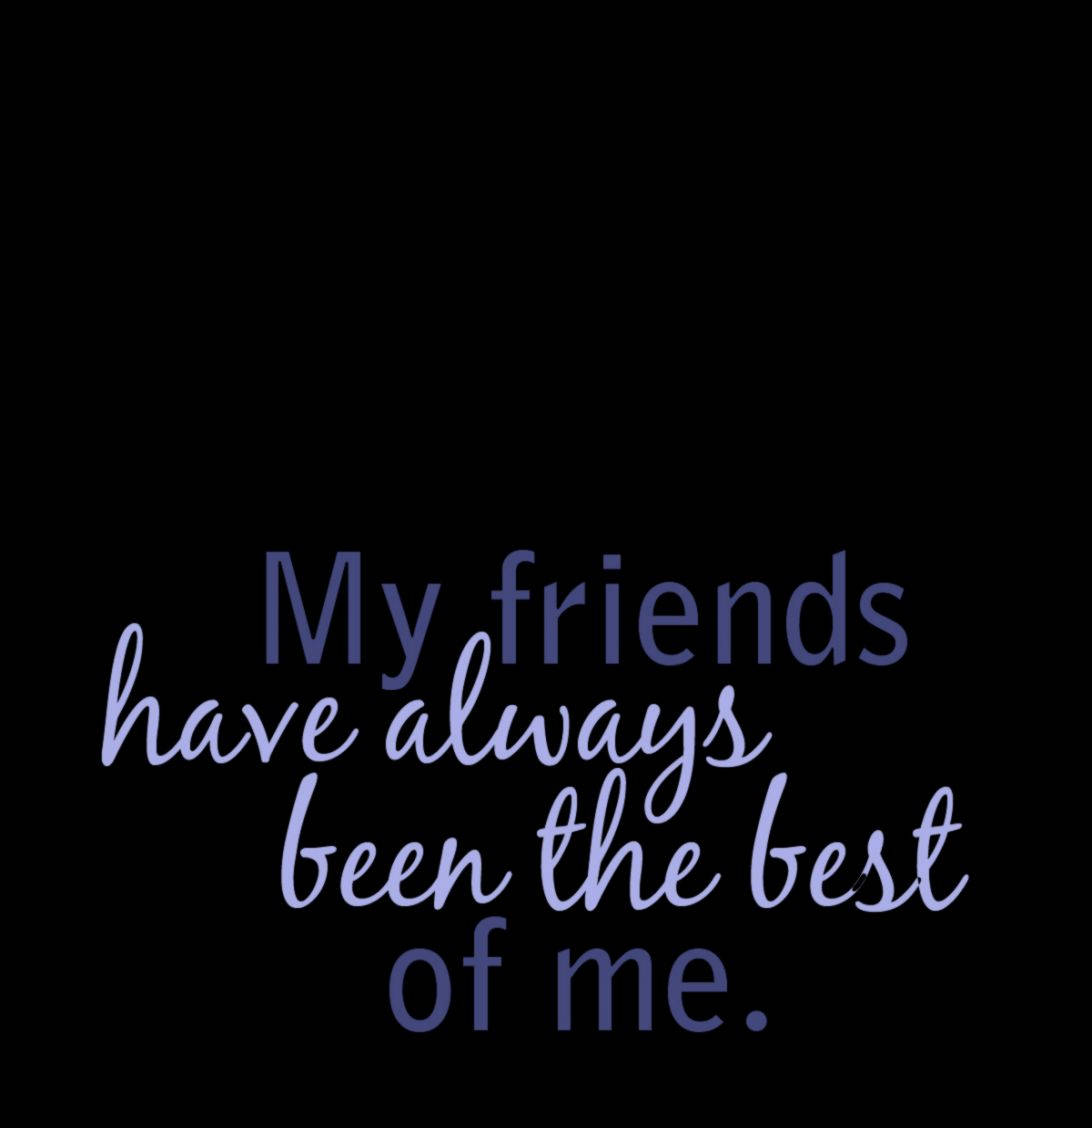 A best friend not only completes you, but also stands by you through thick and thin. Wallpaper